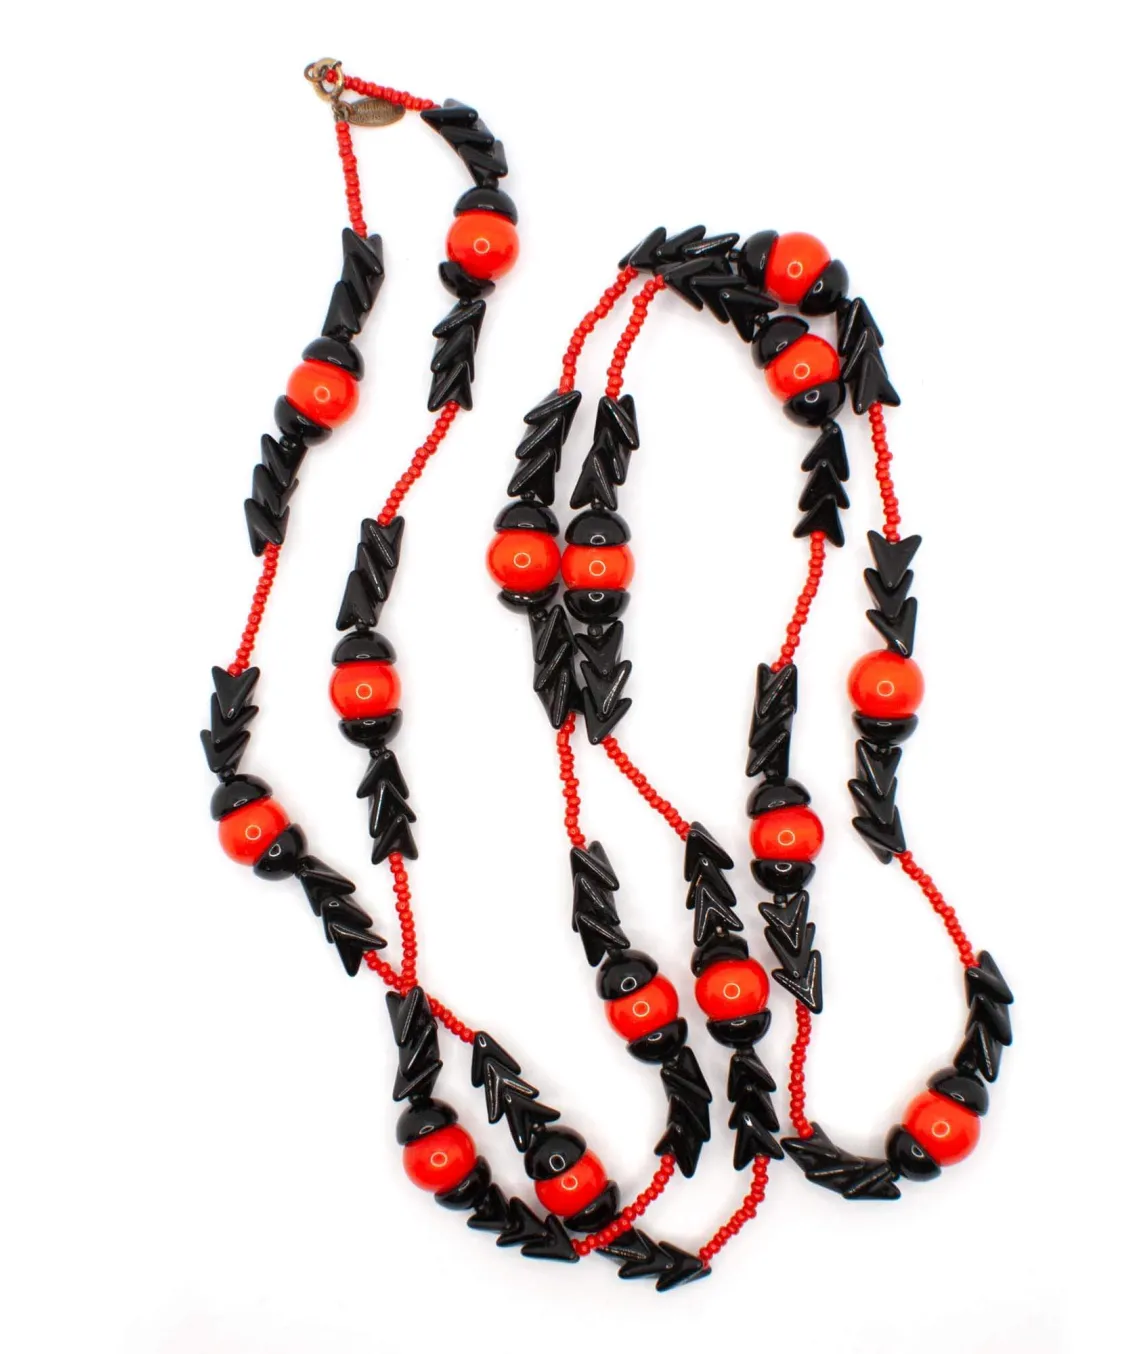 Long beaded necklace by Miriam Haskell with red and black chevron beads